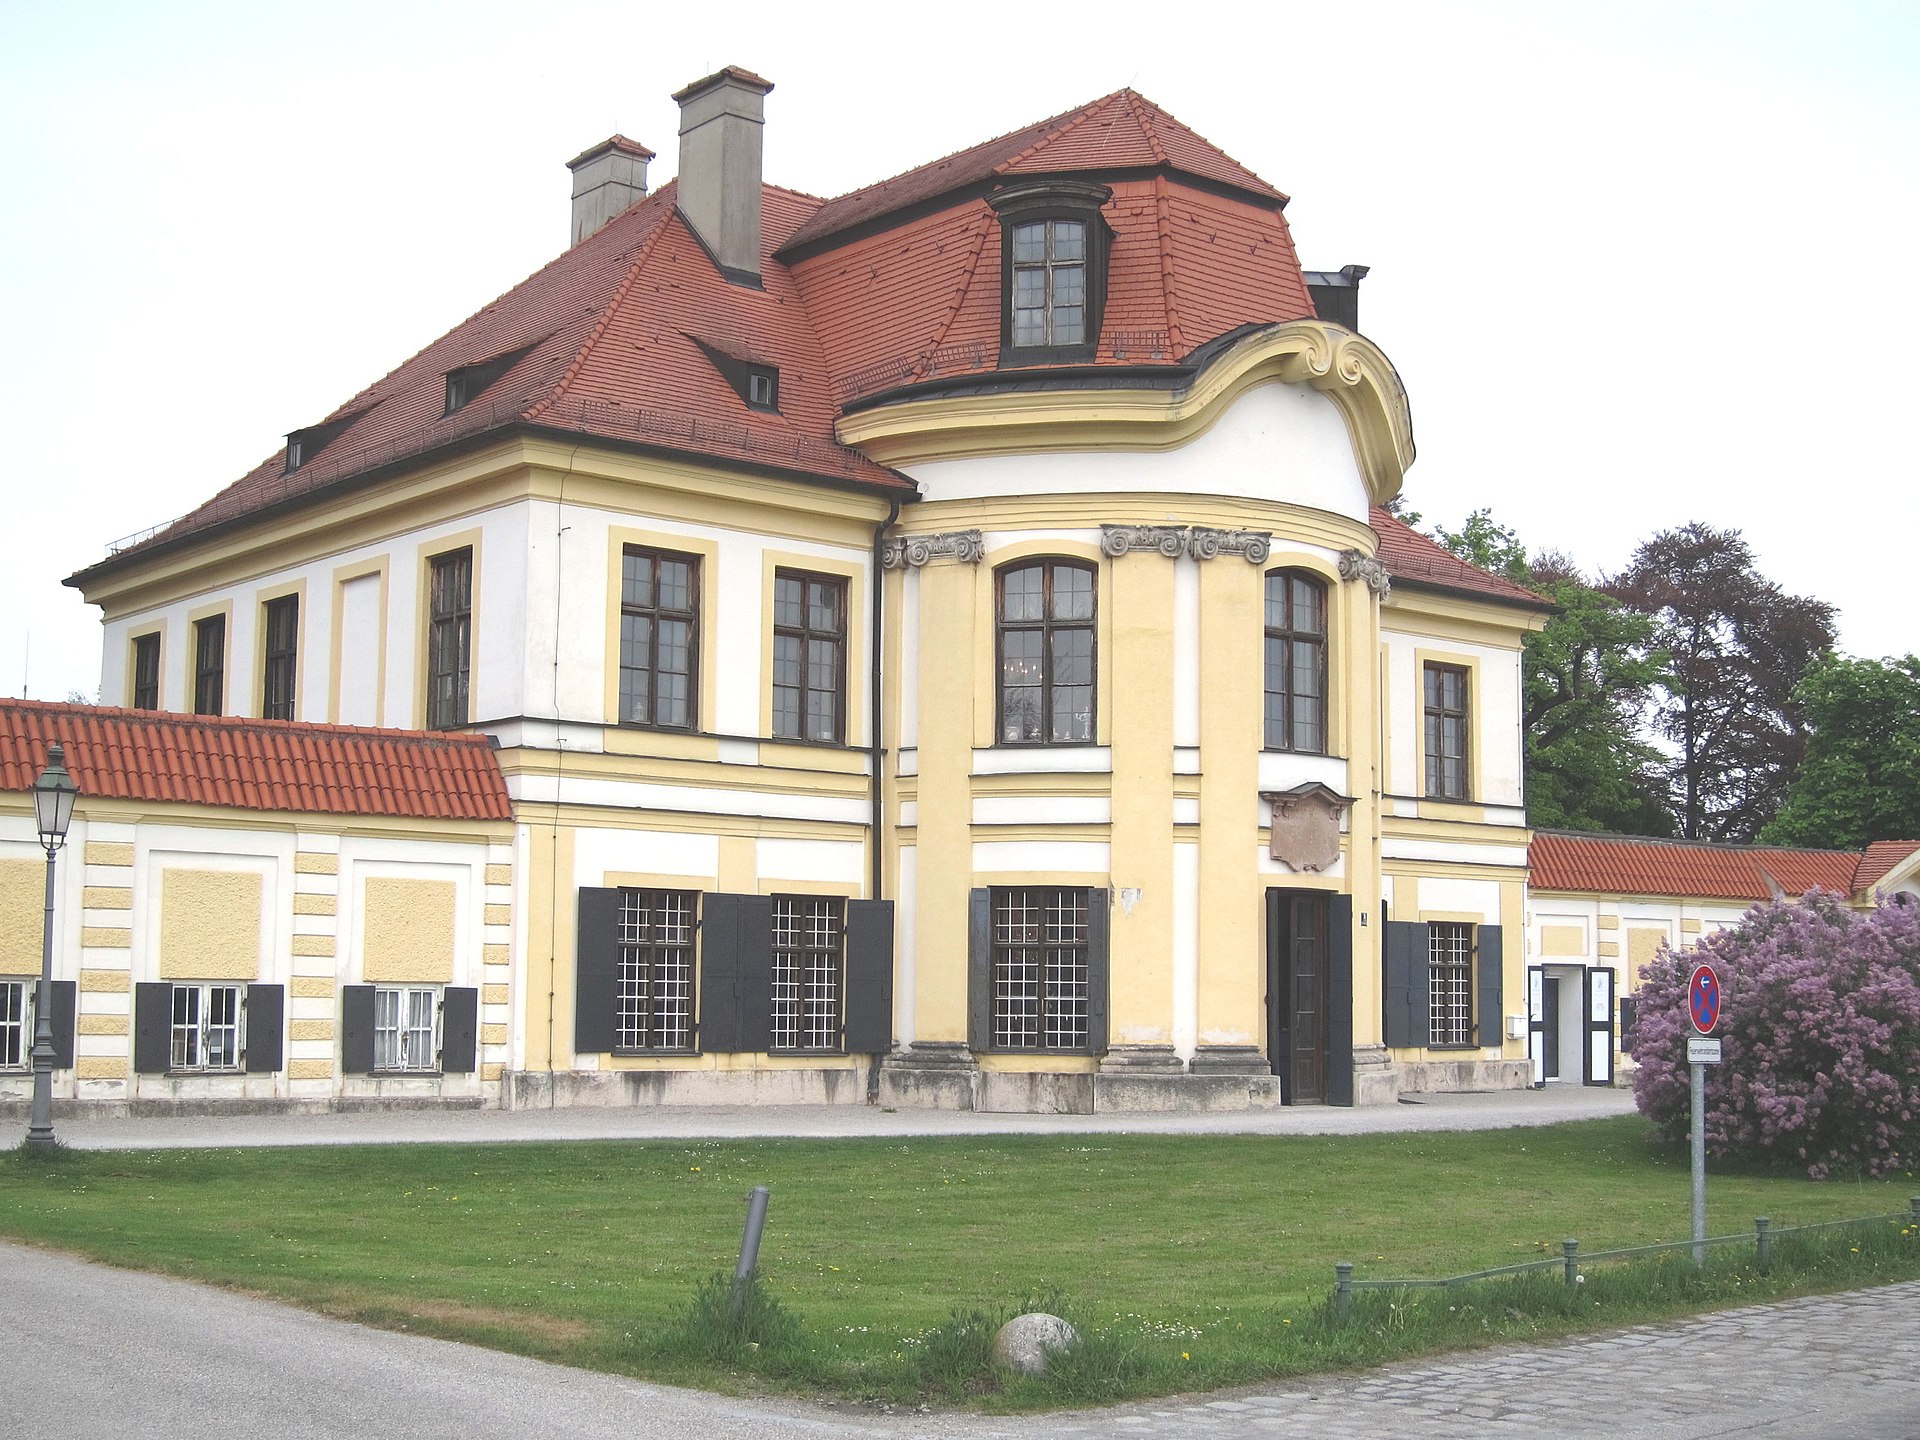 Cavalier house in front of the Nymphenburg Palace, production site since 1761